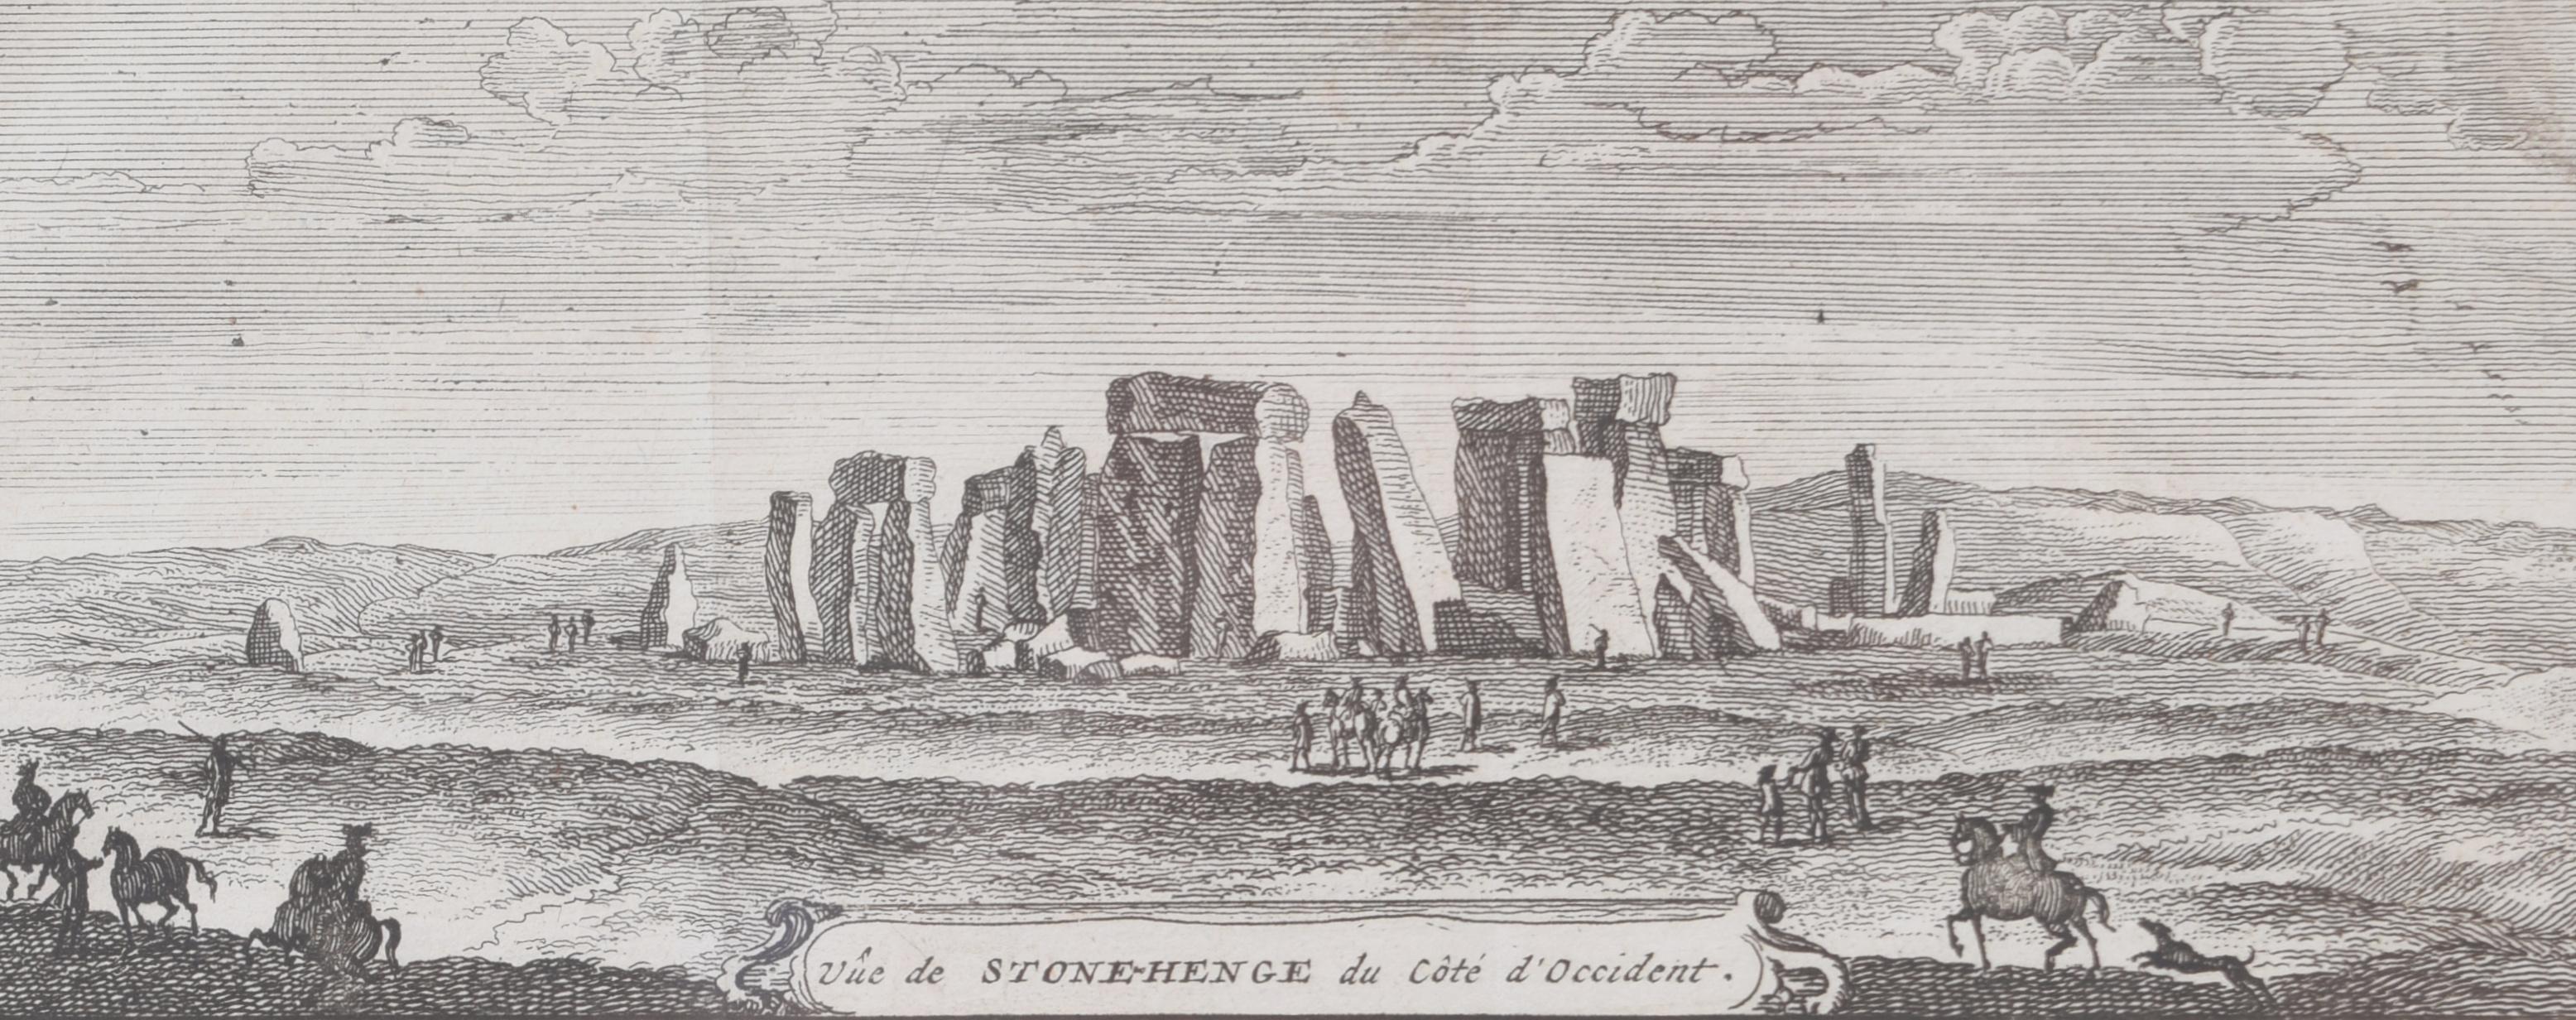 Pieter van der Aa (1659-1733), after David Loggan (1634–1692)
Stonehenge
Engraving
12 x 16 cm

Two eighteenth-century views of the pagan and mystical Stonehenge, engraved by Pieter van der Aa after David Loggan, the noted engraver, draughtsman, and